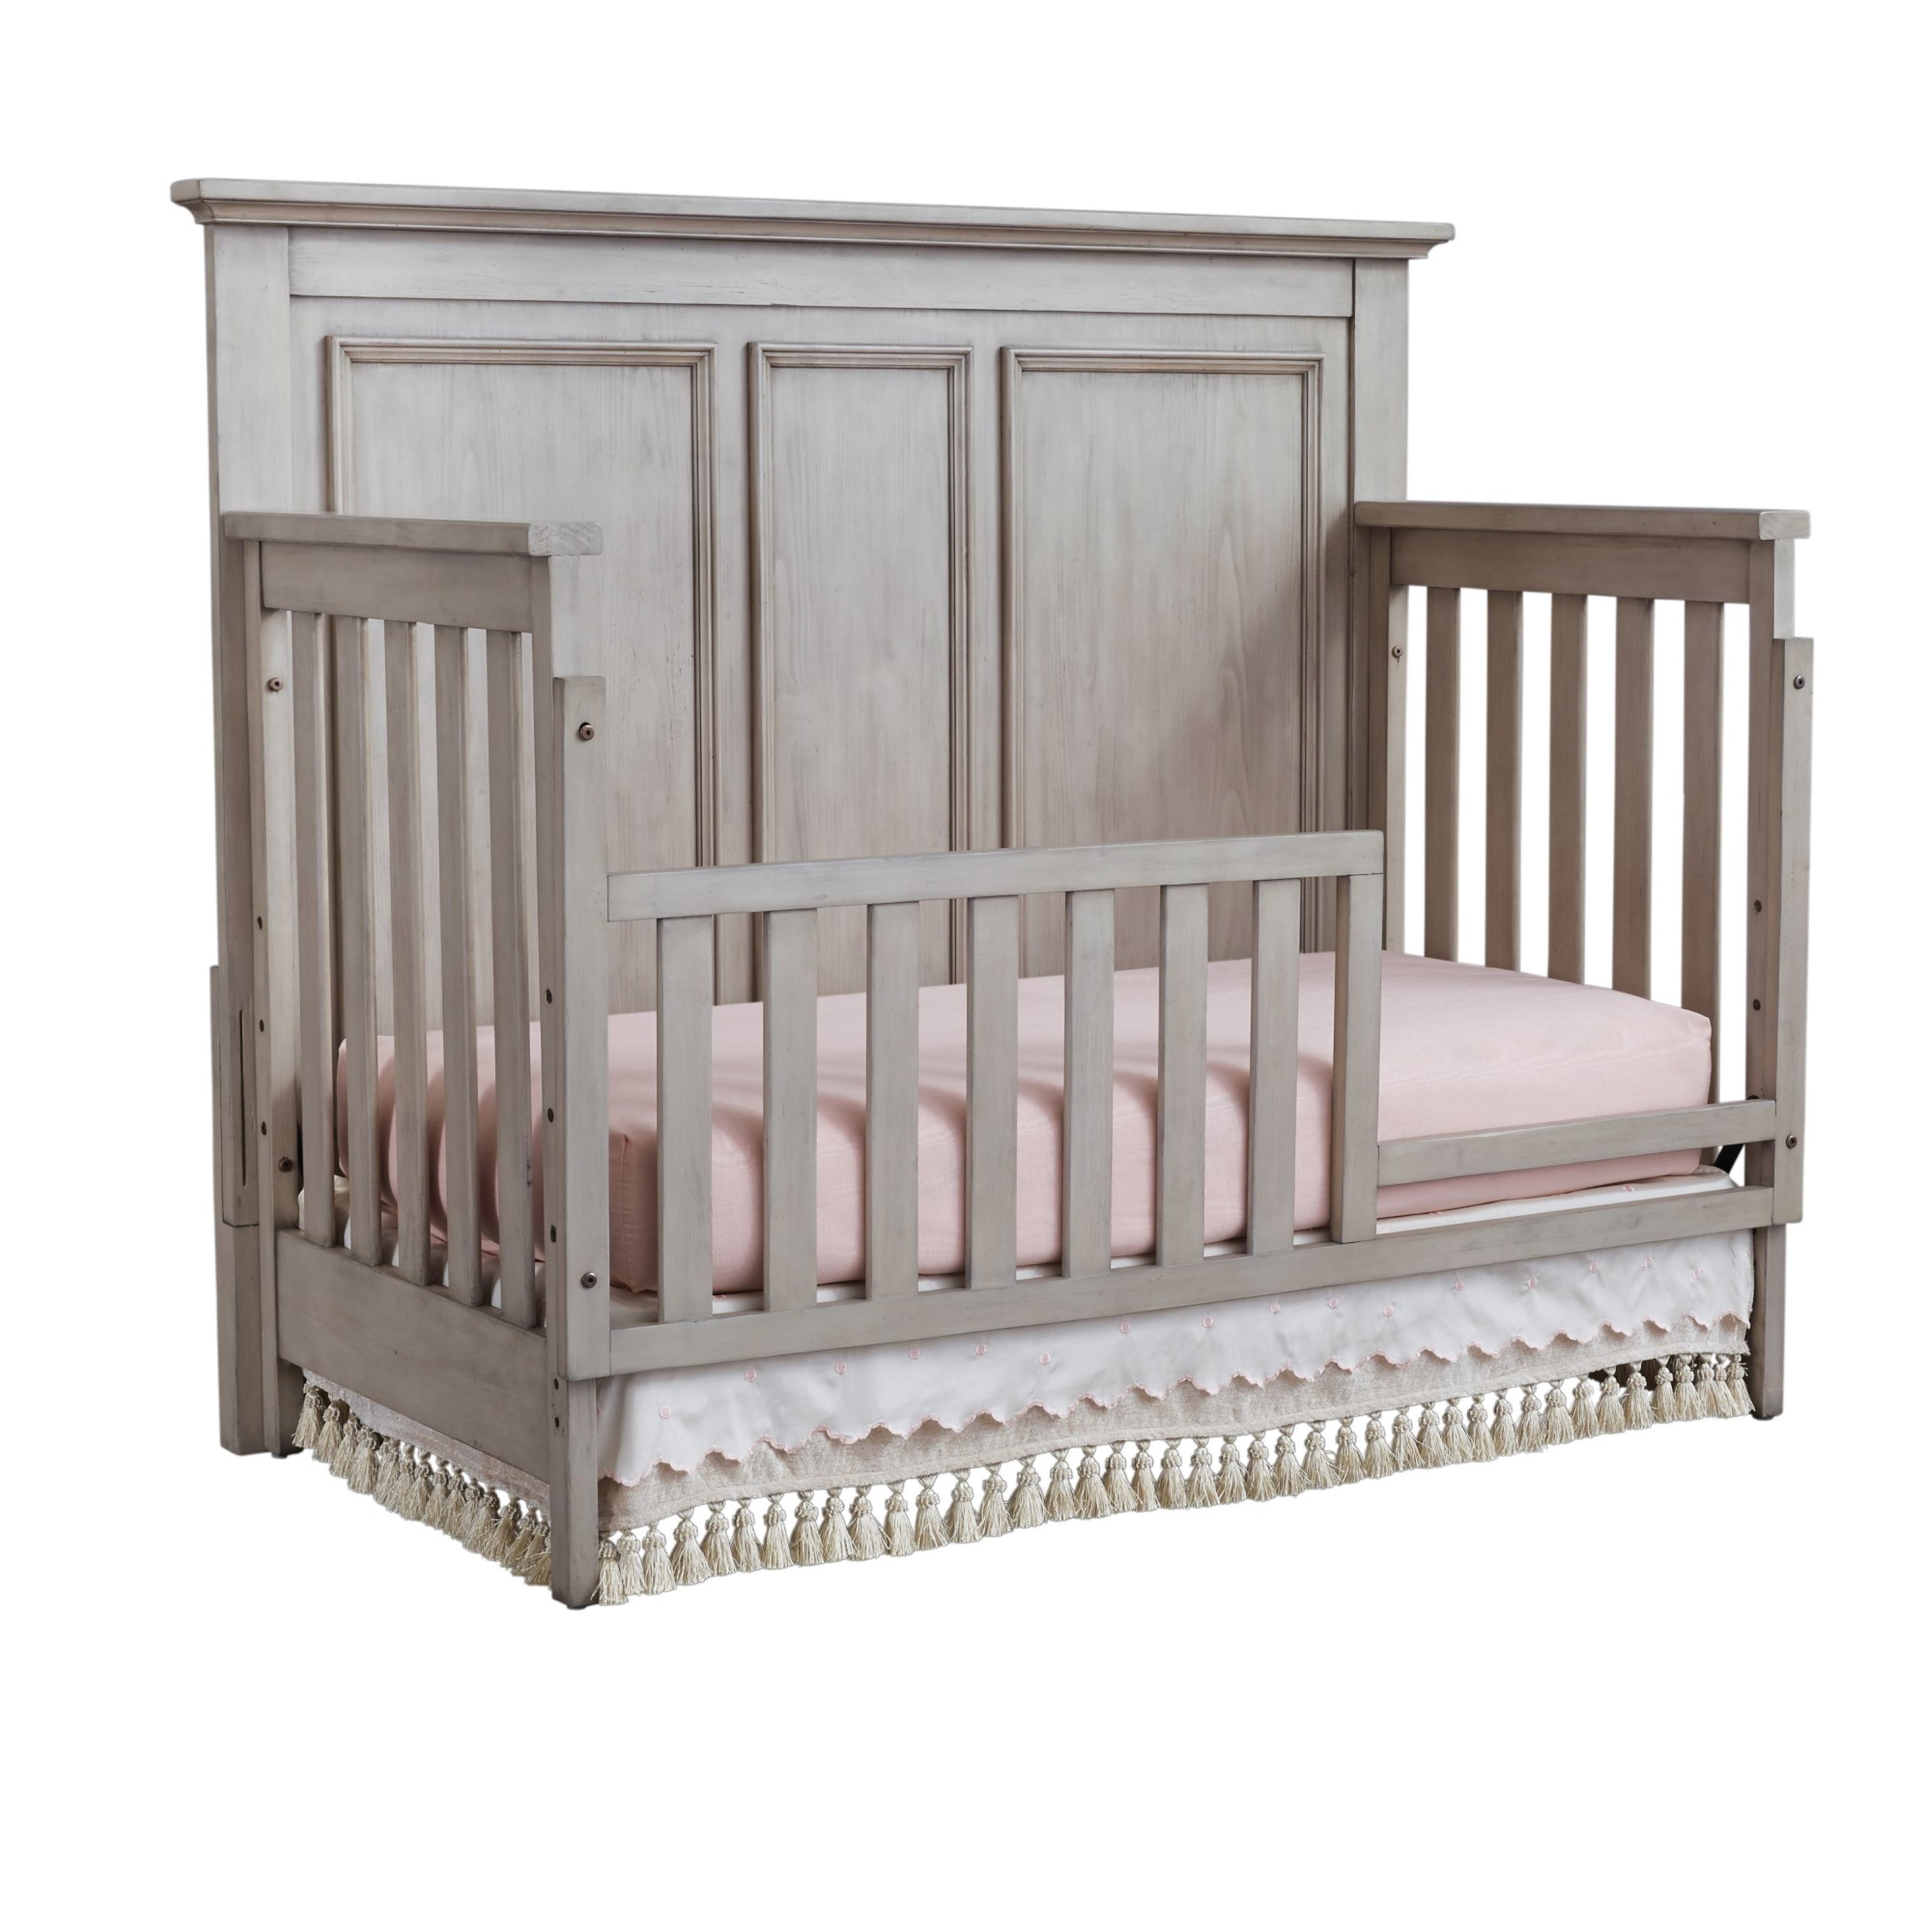 Oxford Baby Kenilworth 4-in-1 Convertible Crib, Stone Wash, GREENGUARD Gold Certified, Wooden Crib - image 3 of 10